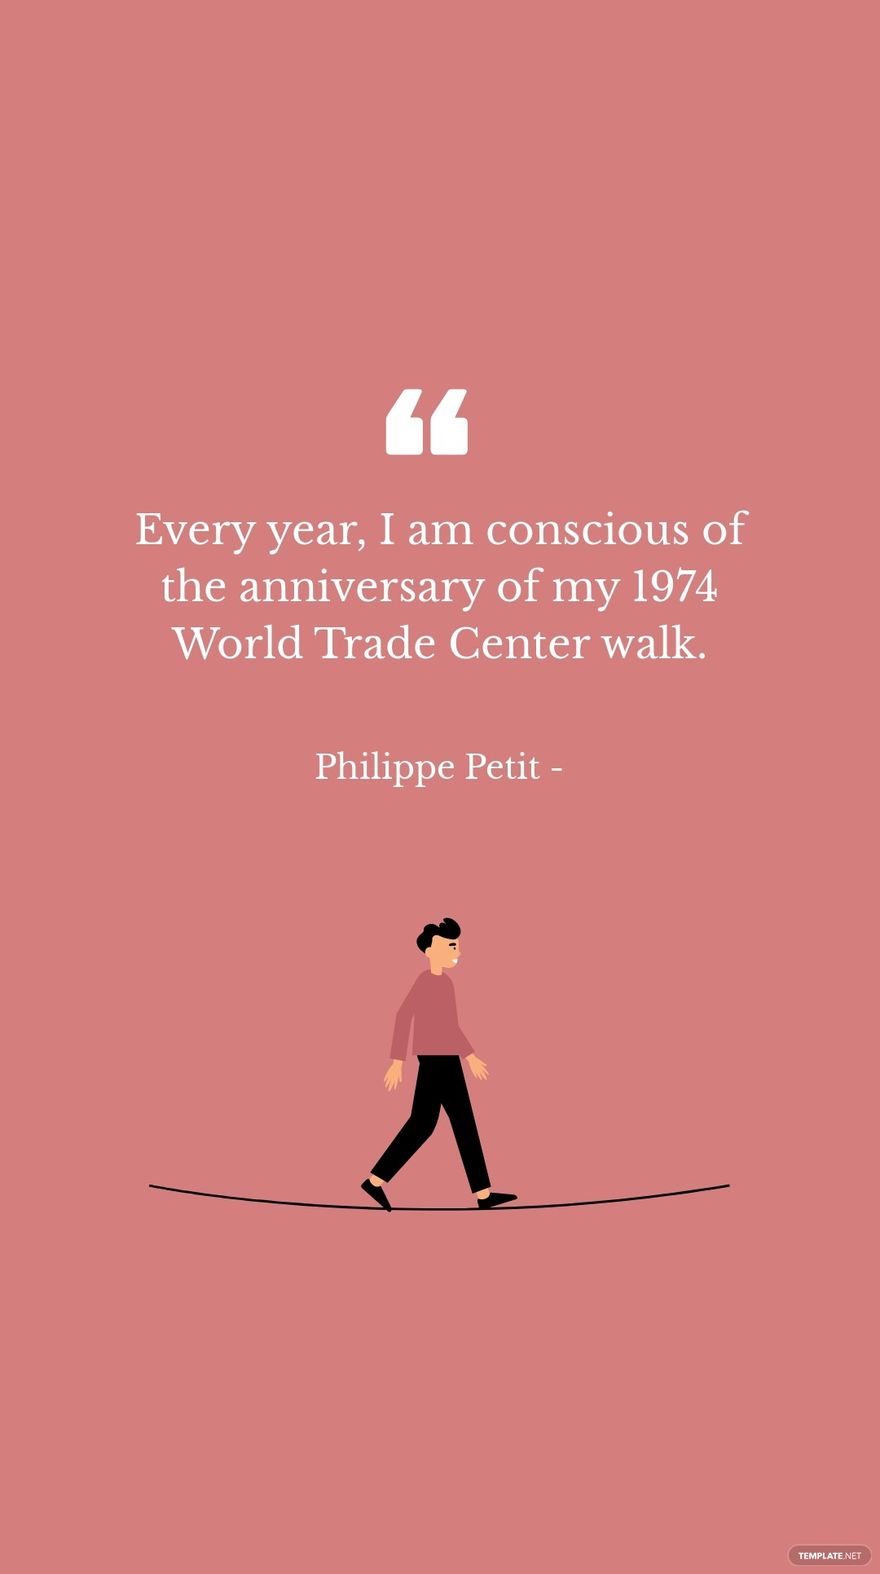 Philippe Petit - Every year, I am conscious of the anniversary of my 1974 World Trade Center walk.